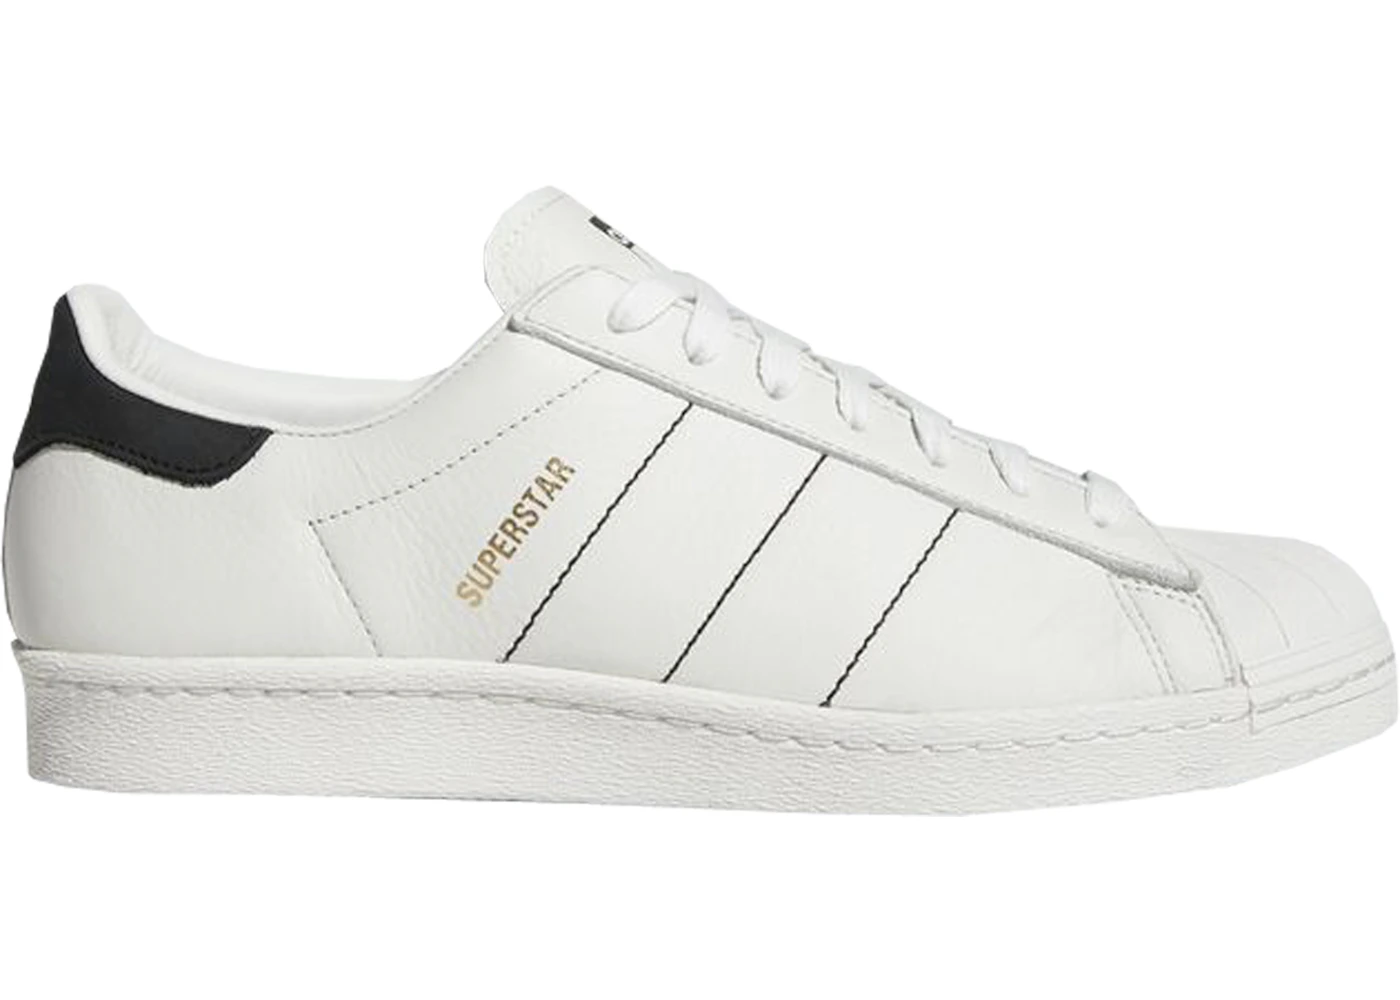 adidas Superstar Handcrafted Pack (Off White) Men's - CQ2653 - US